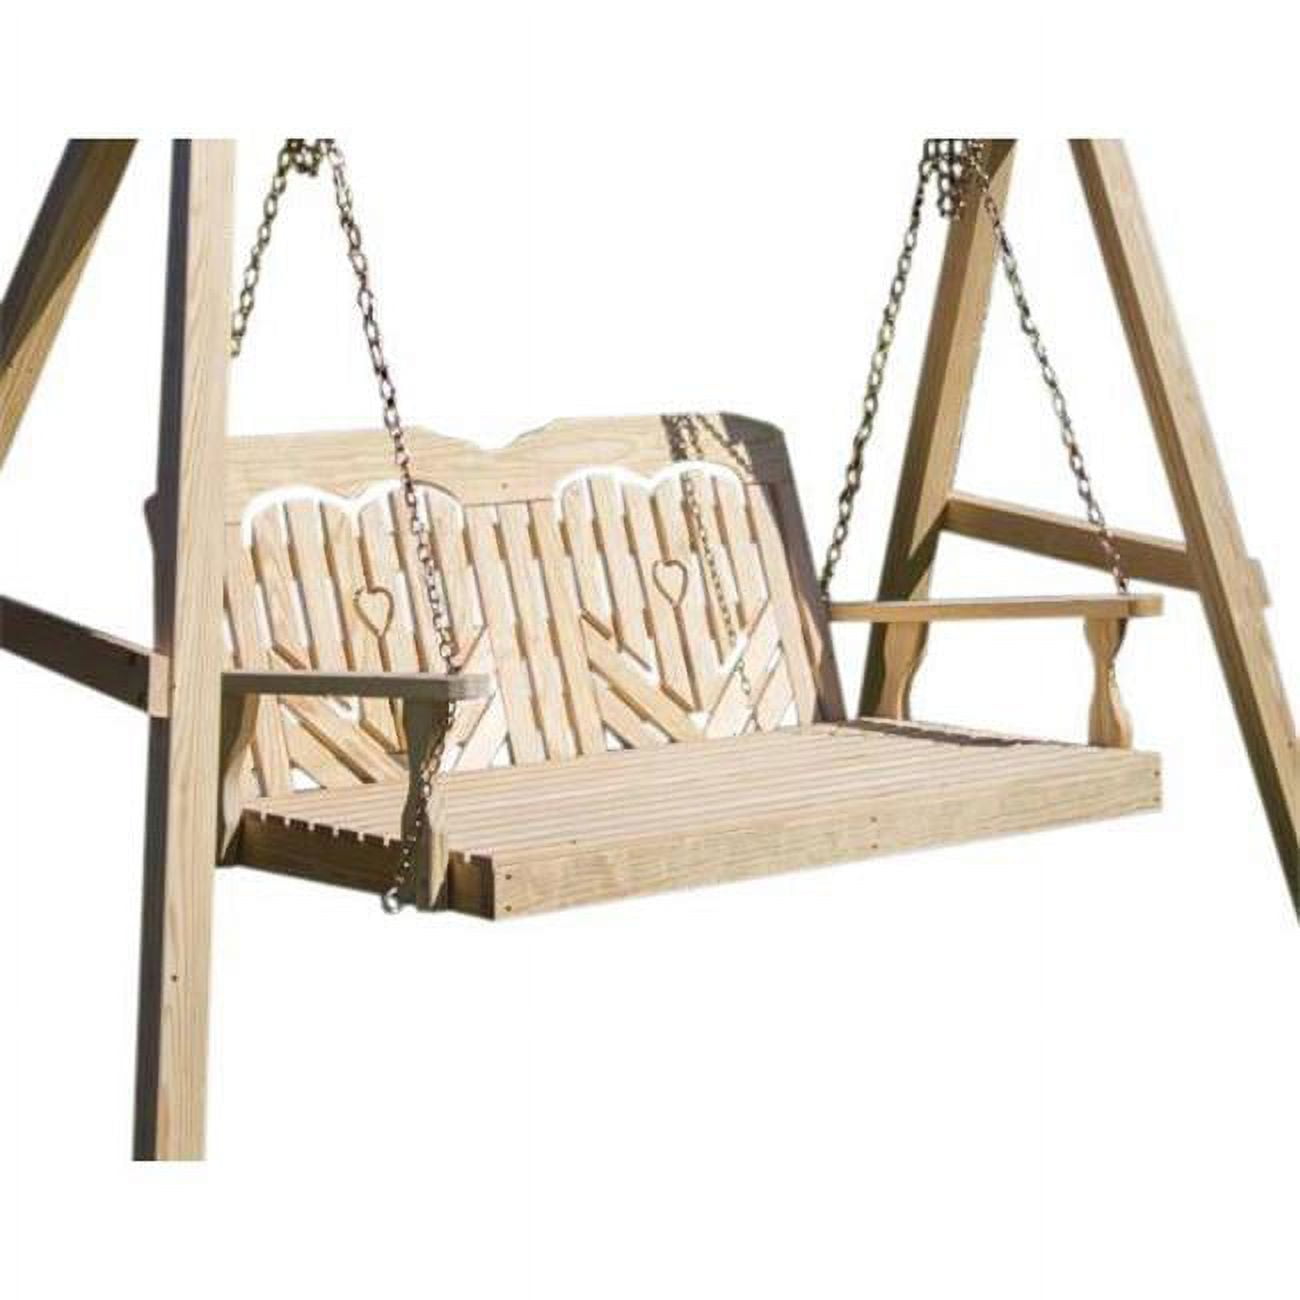 Picture of Creekvine Designs FTSBED60HBCVD 60 in. Treated Pine Heartback Swingbed